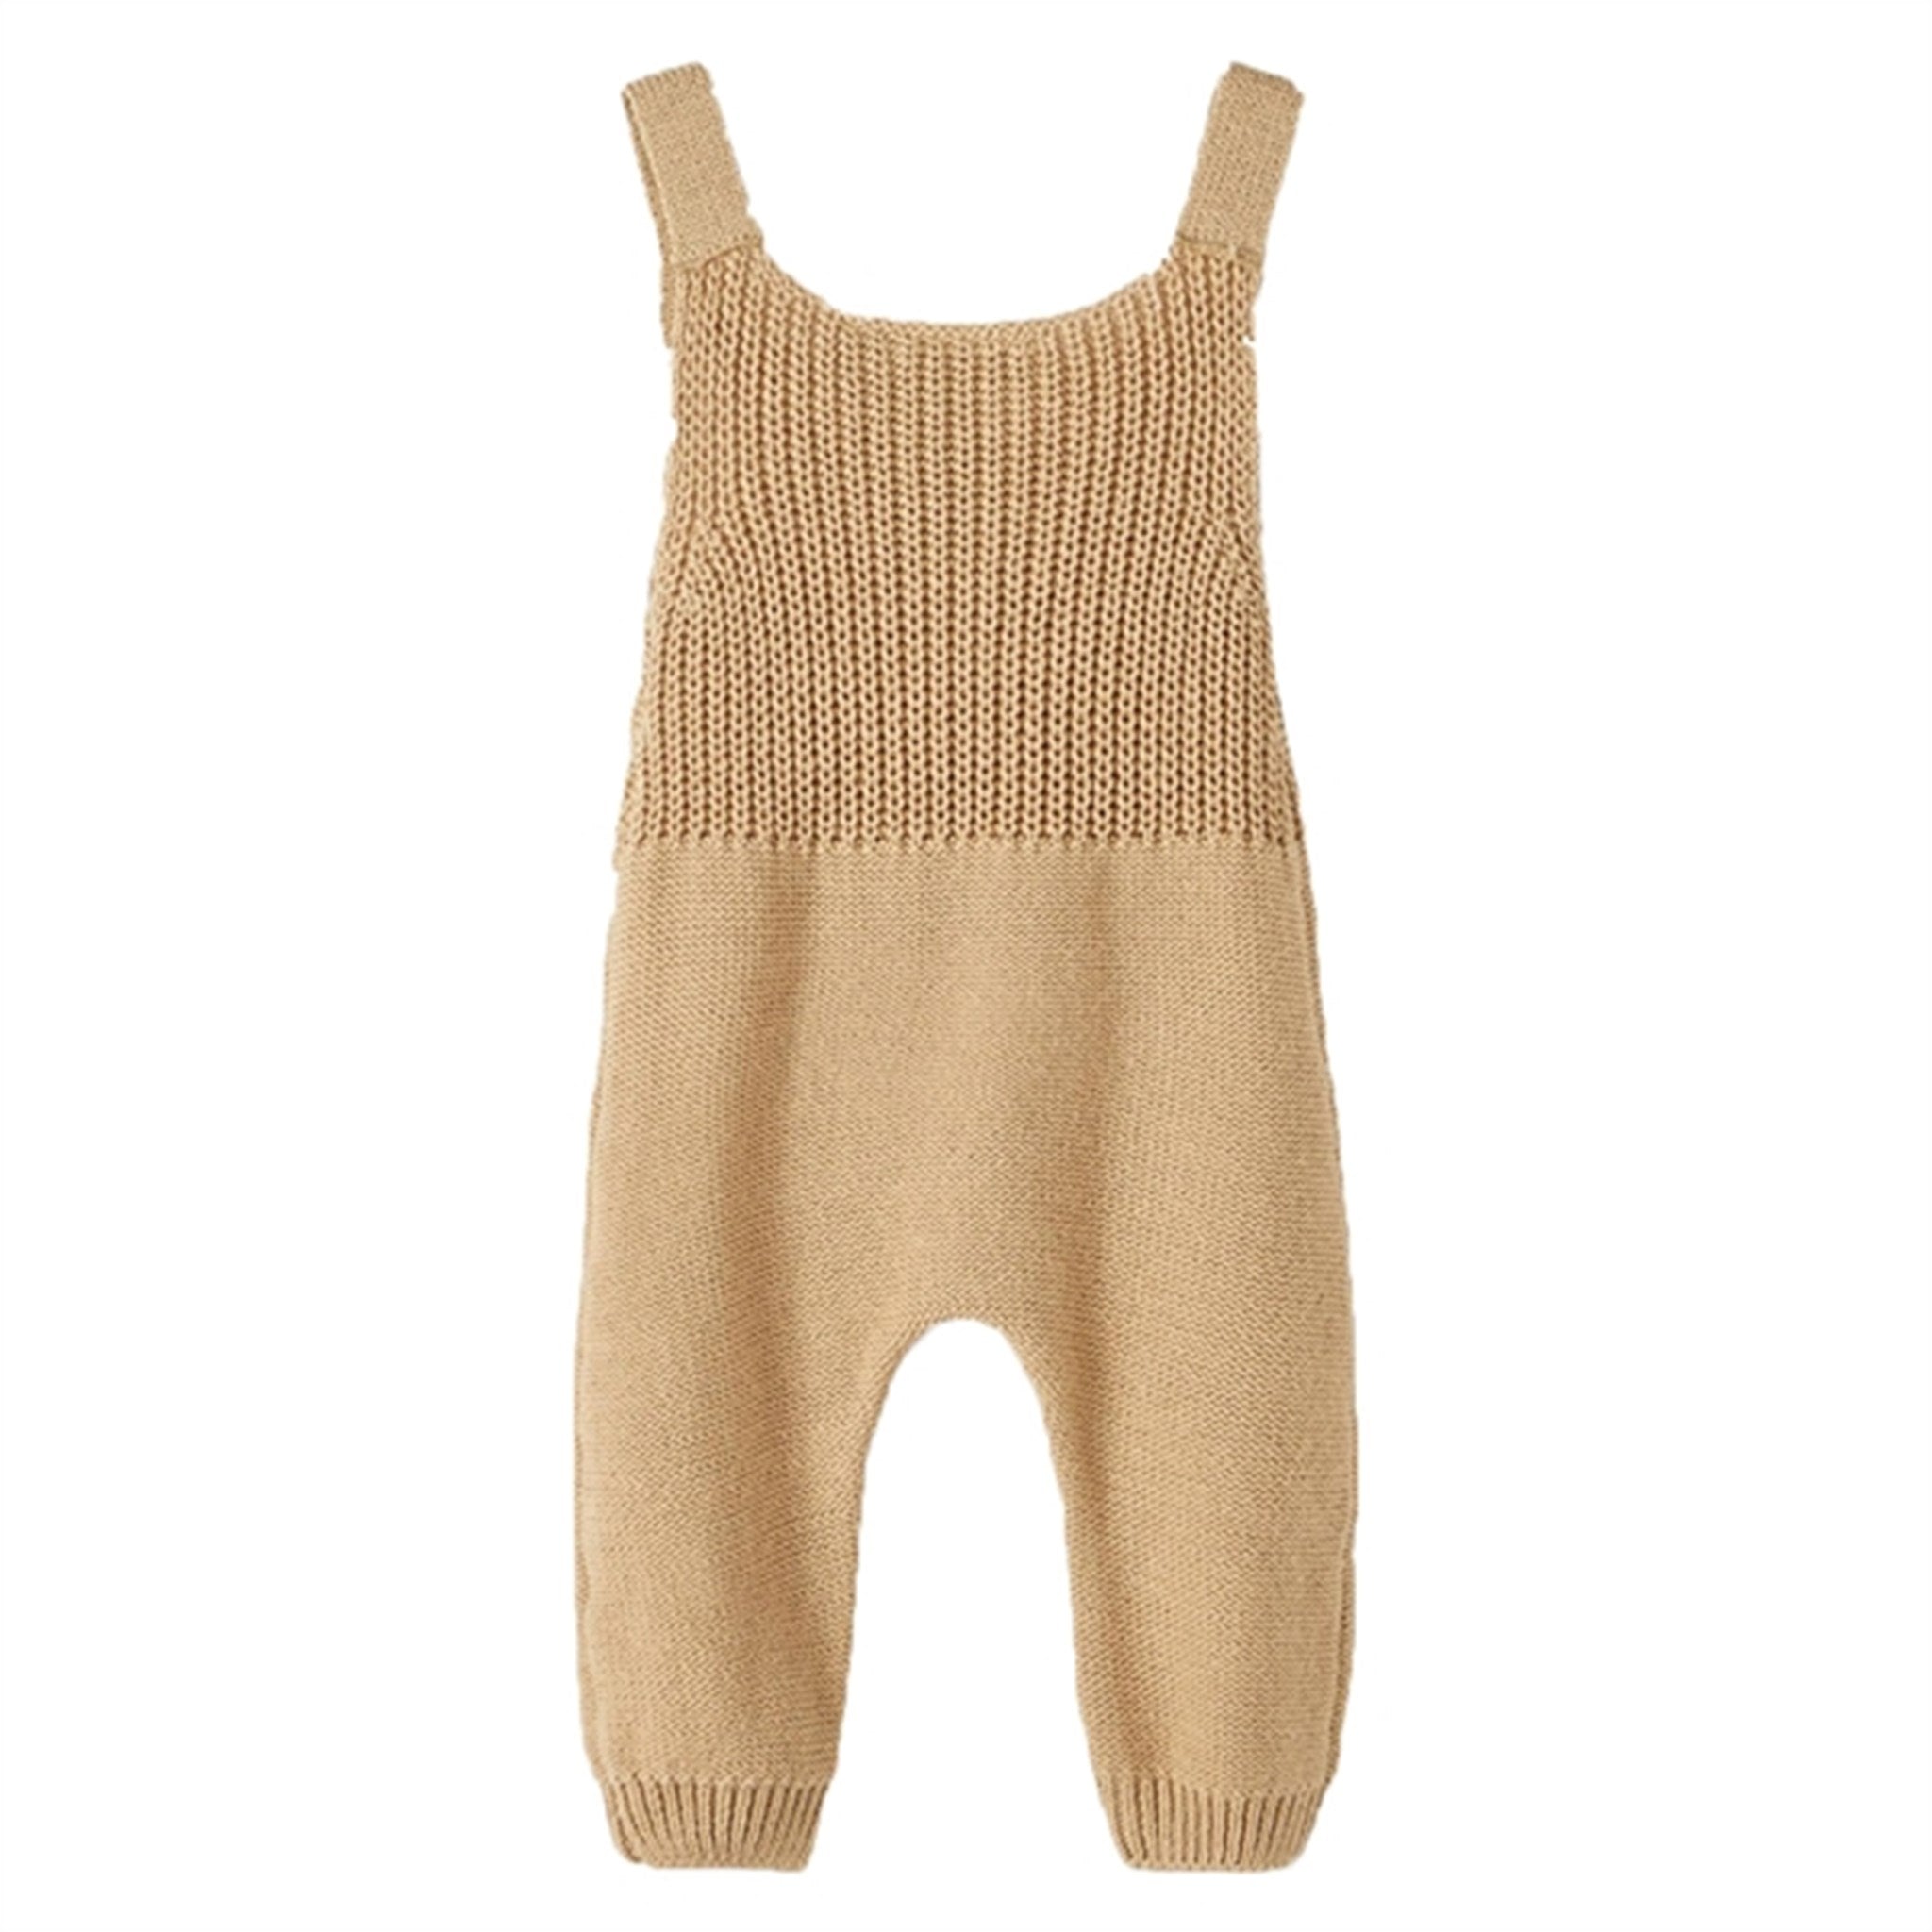 Lil' Atelier Curds & Whey Laguno Loose Stickat Overall 3